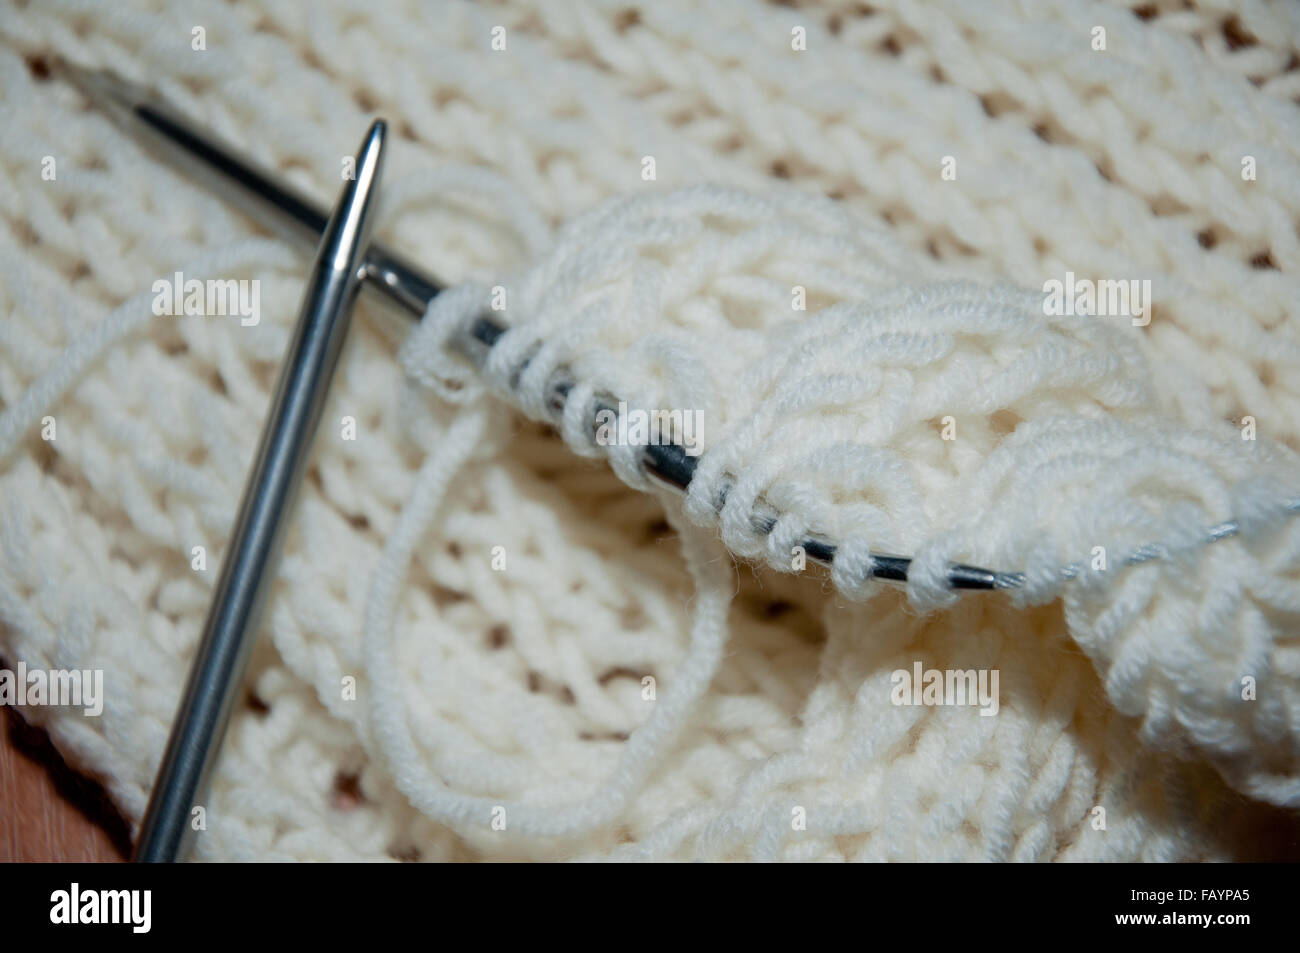 White wool scarf and knitting needle. Knit work. Stock Photo